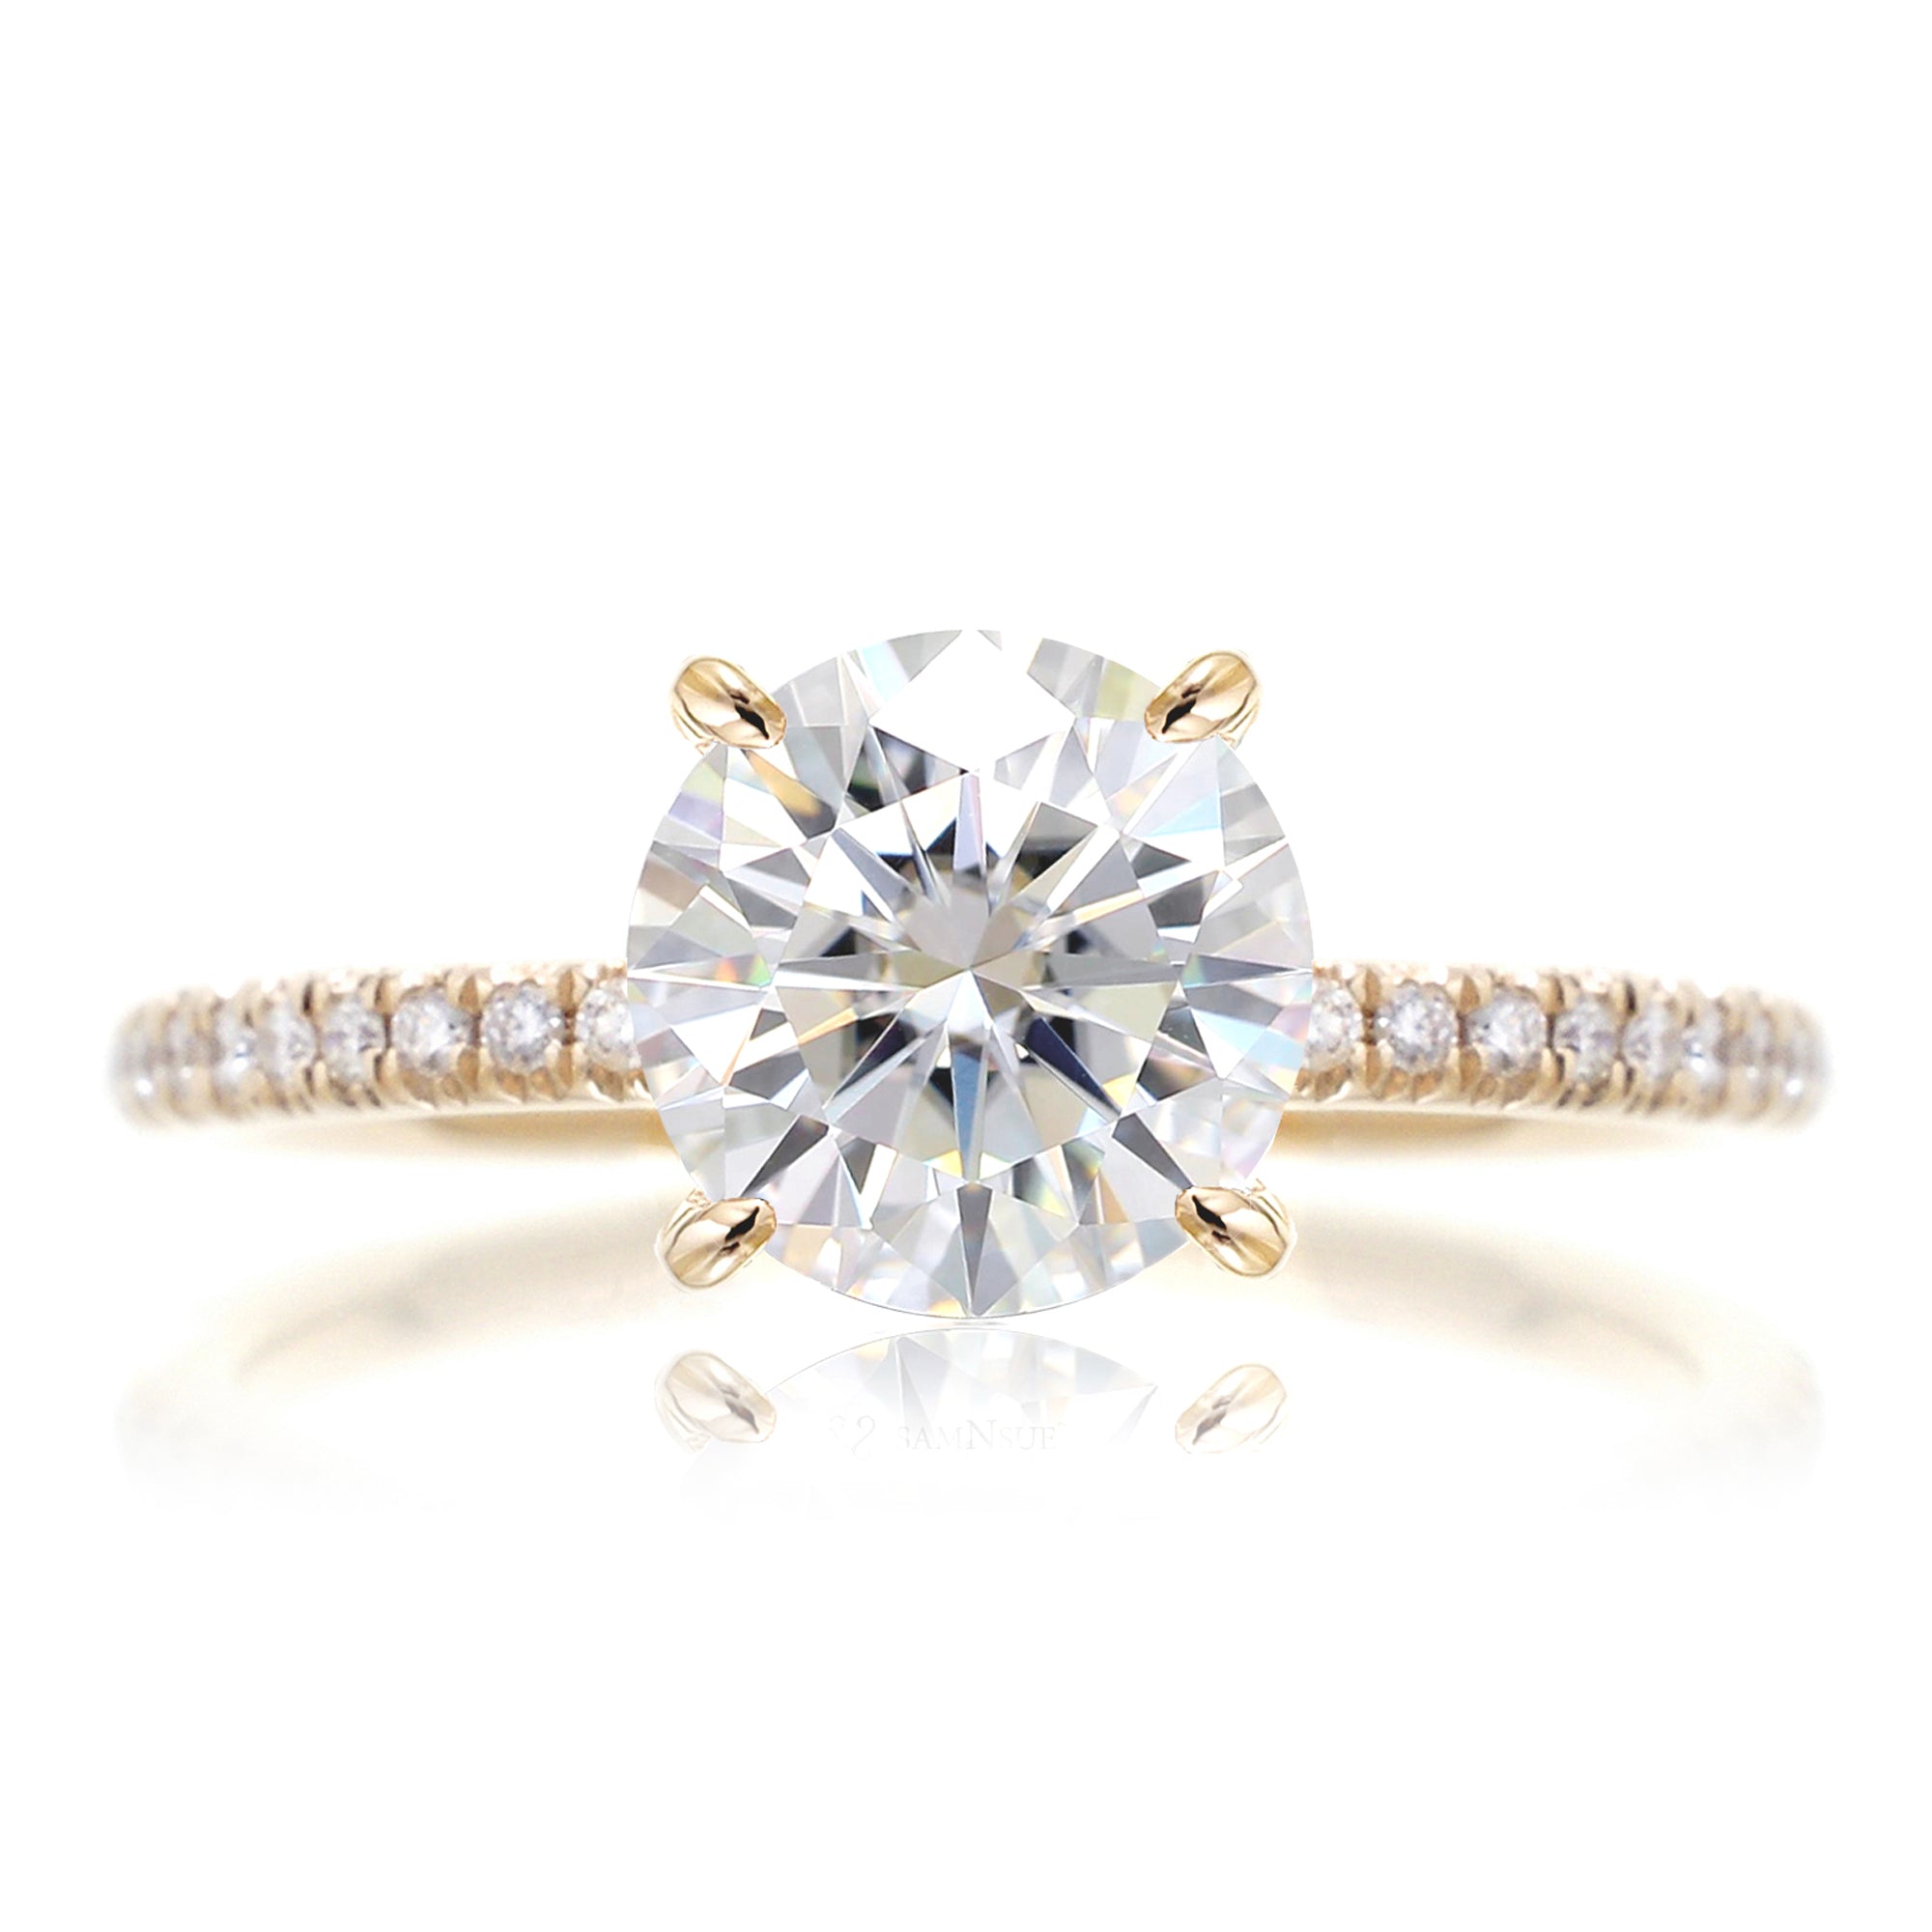 Round cut lab-grown diamond engagement ring yellow gold - The Ava